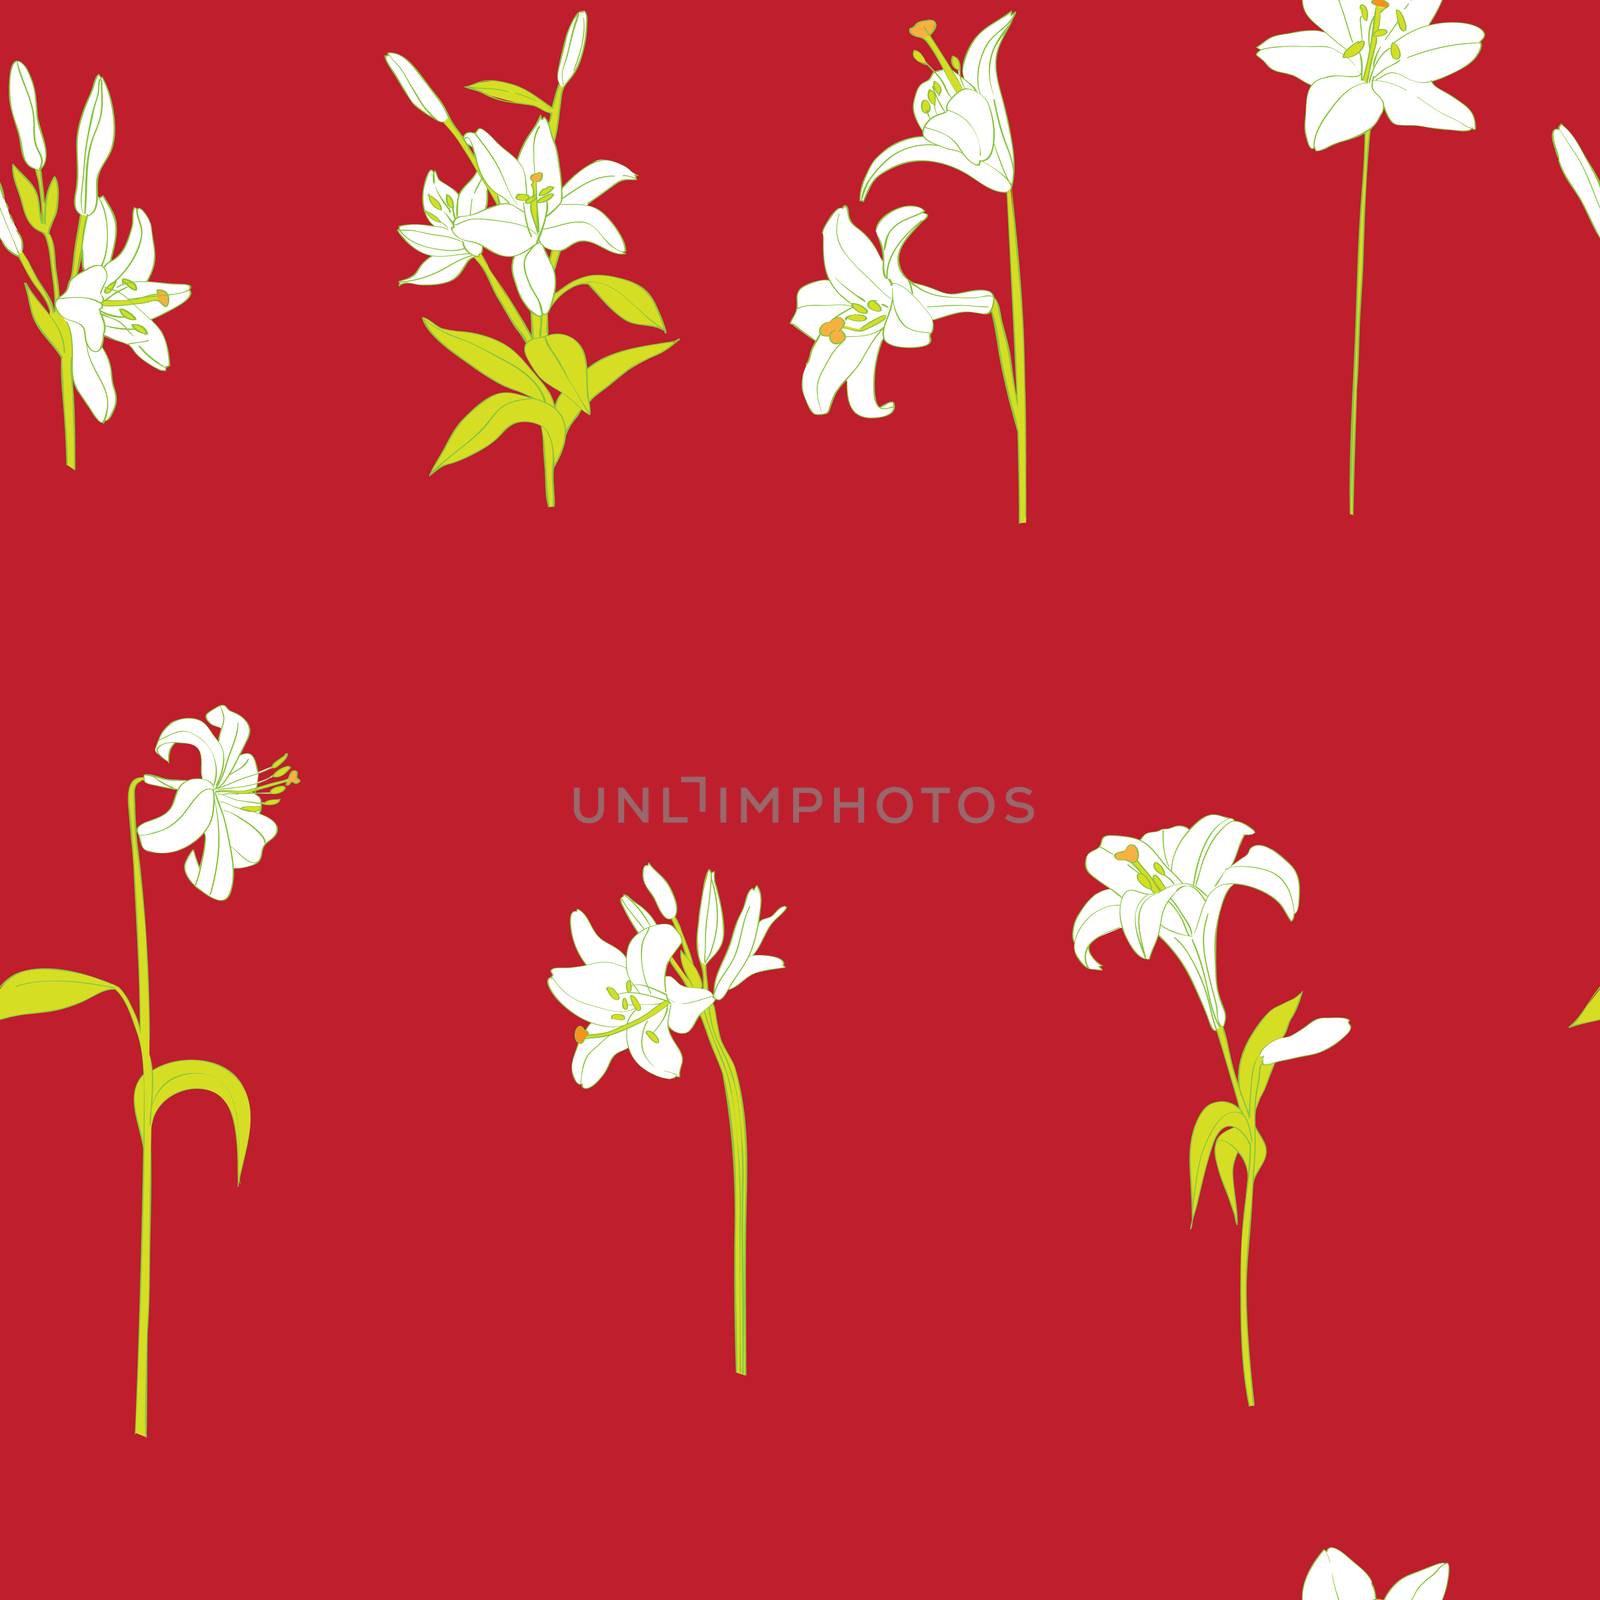 lilies sparse pattern on red by catacos